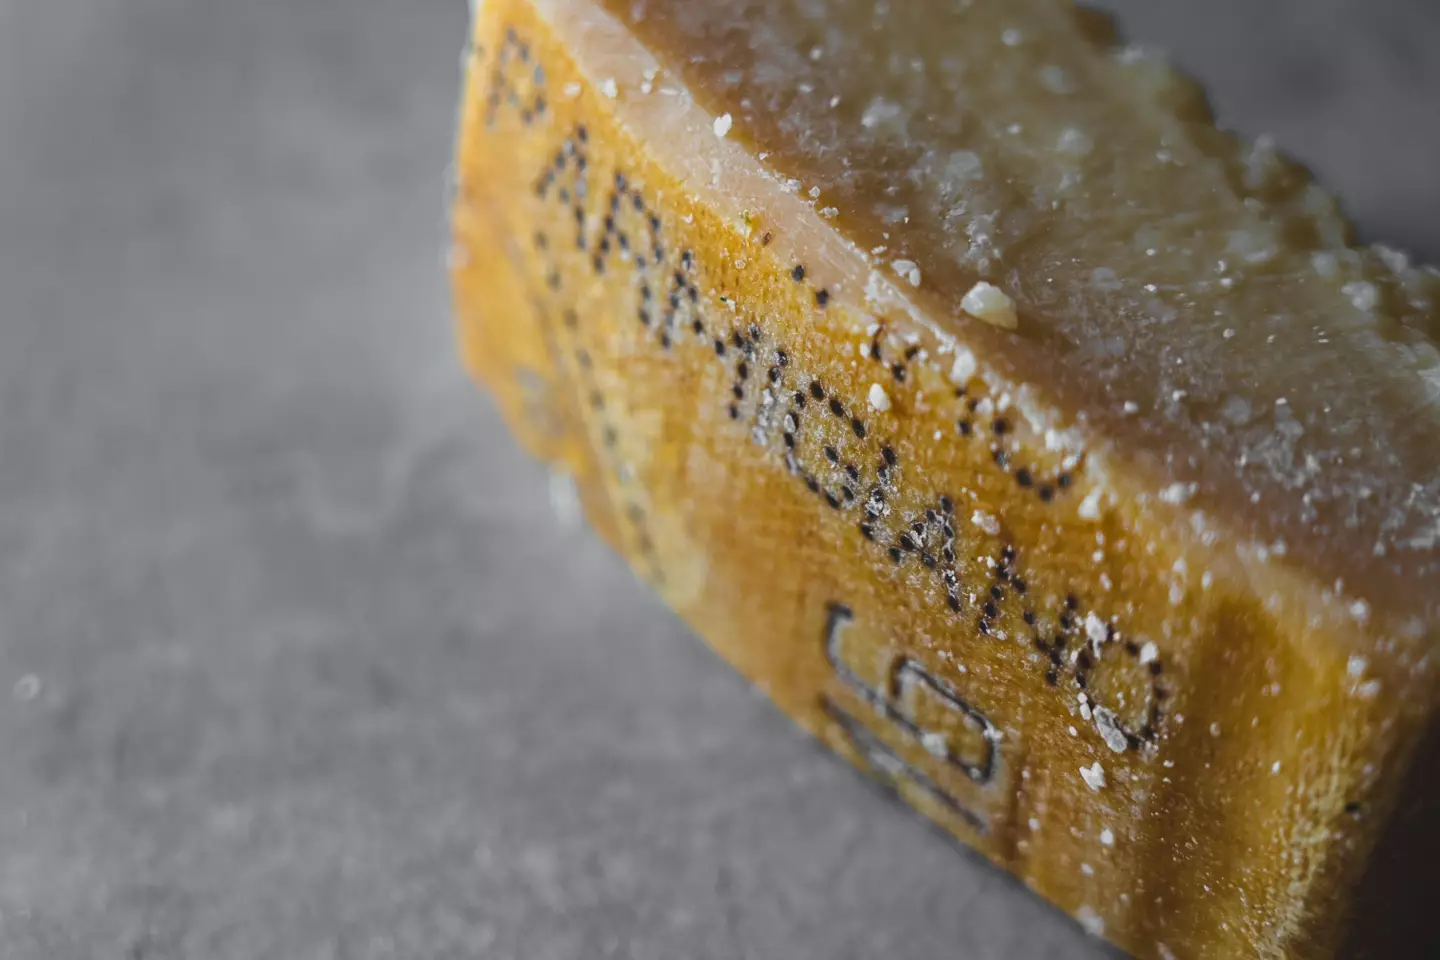 Parmesan contains Rennet - an enzyme found in the stomach lining of goats and calves.